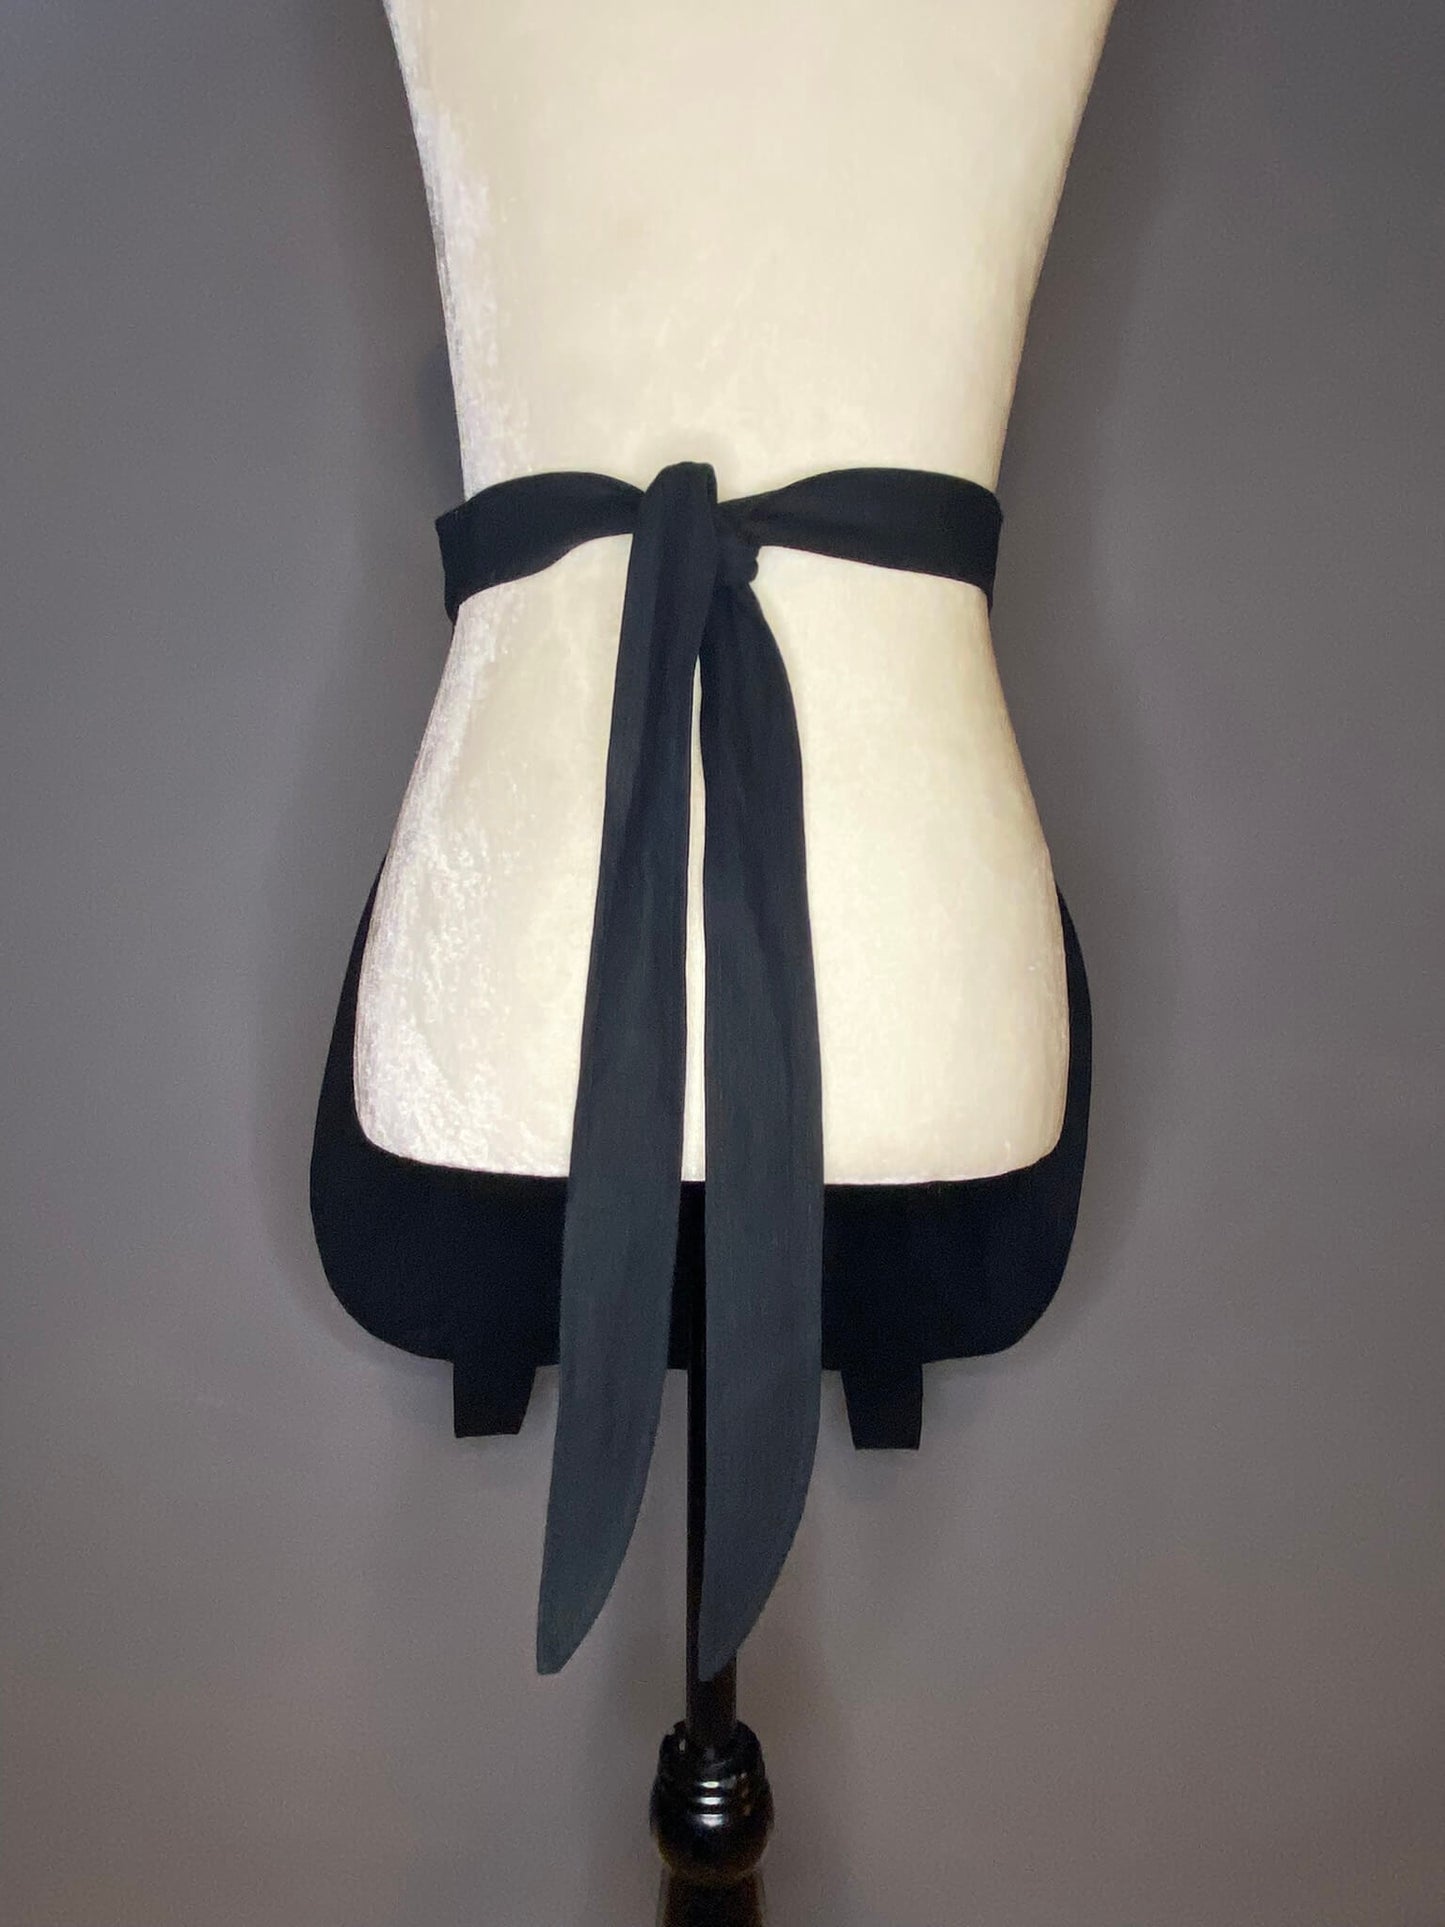 back view of a black, lined cotton linen apron in the shape of a cauldron. Back features two long ties for either your waist or hips.